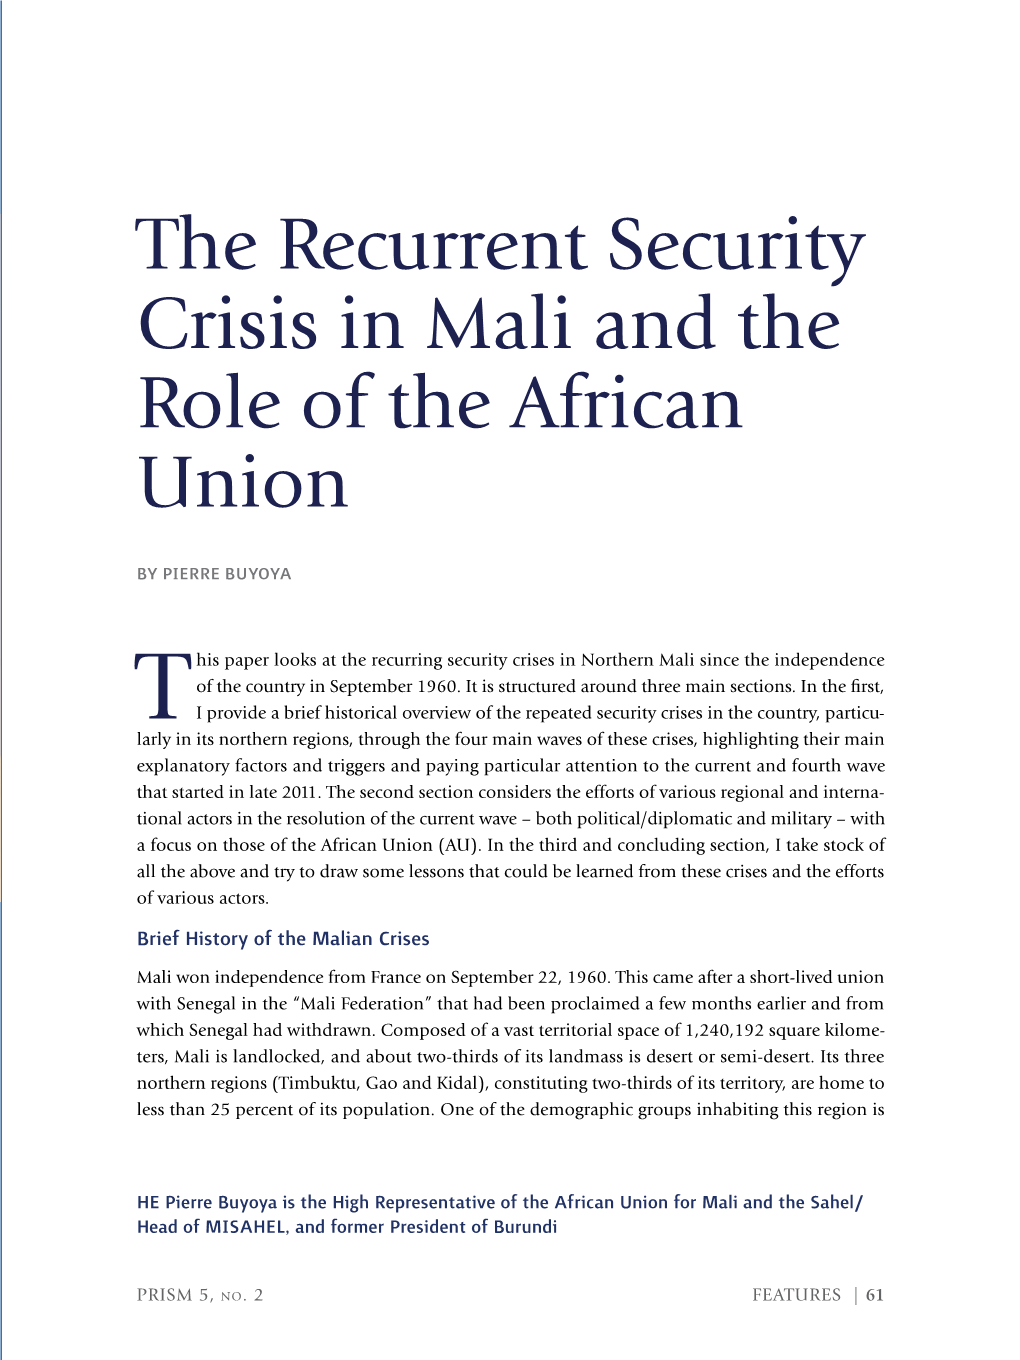 The Recurrent Security Crisis in Mali and the Role of the African Union